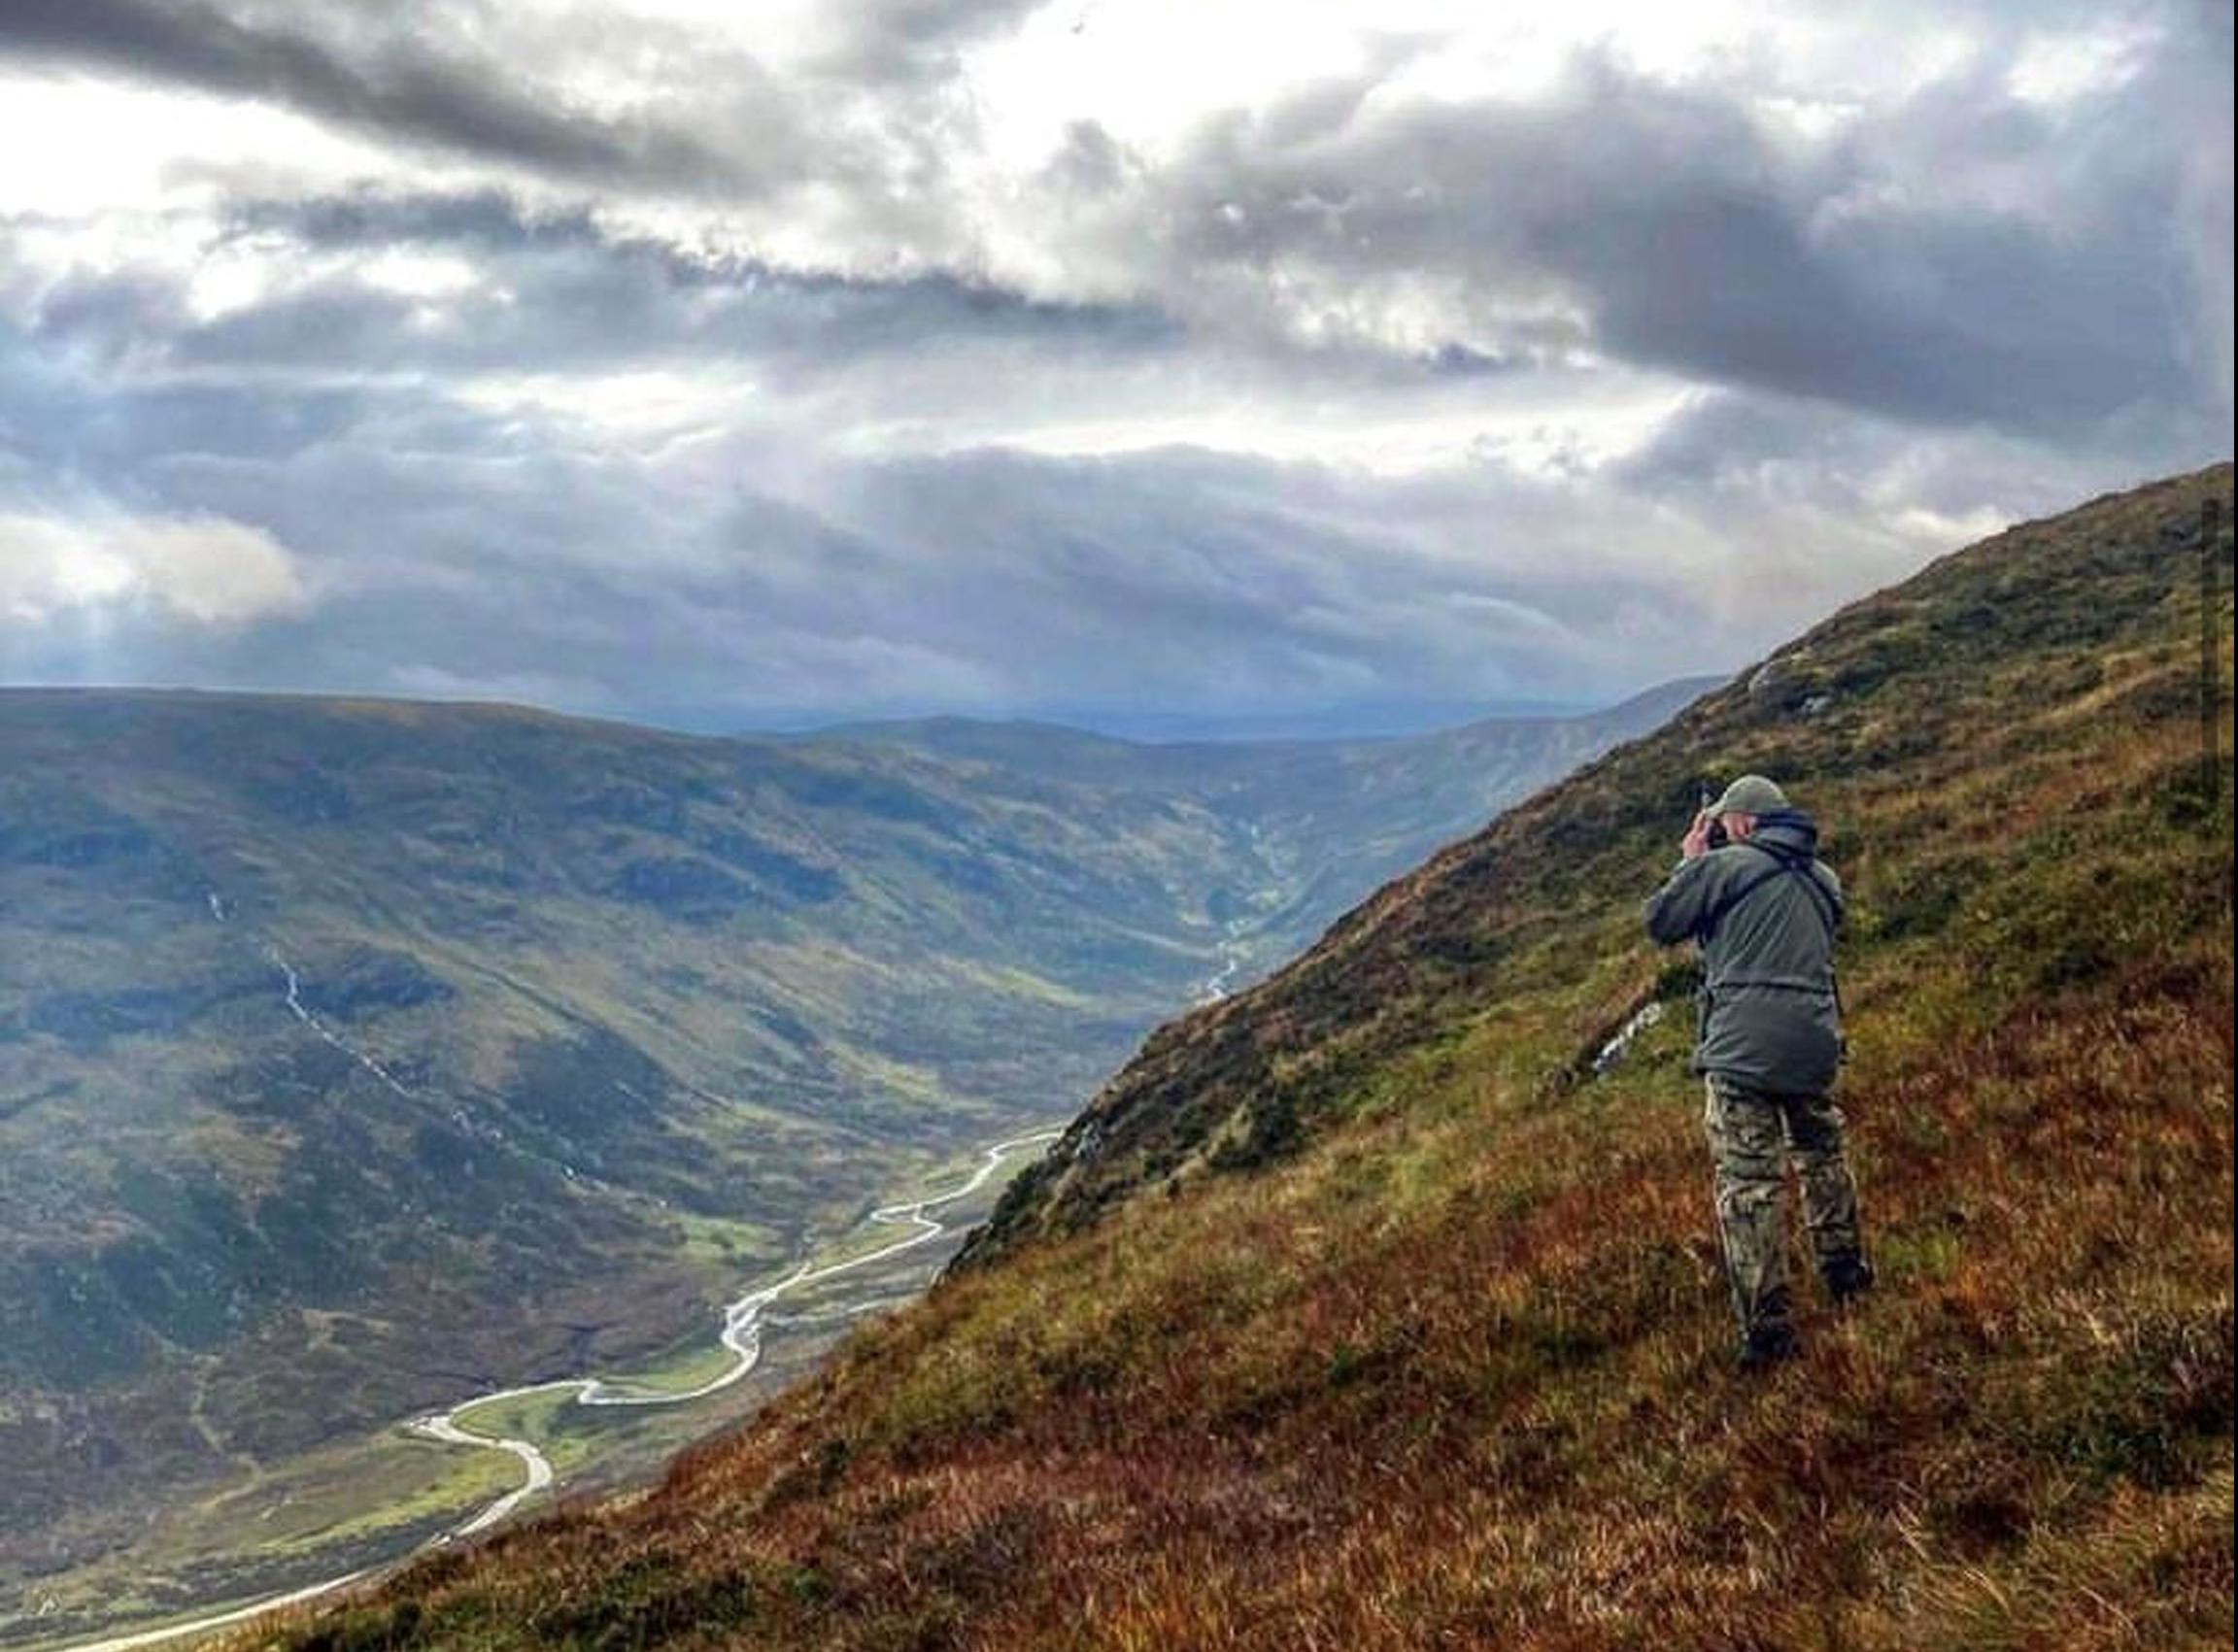 Gamekeeper using binoculars on a hill above a valley in Scotland